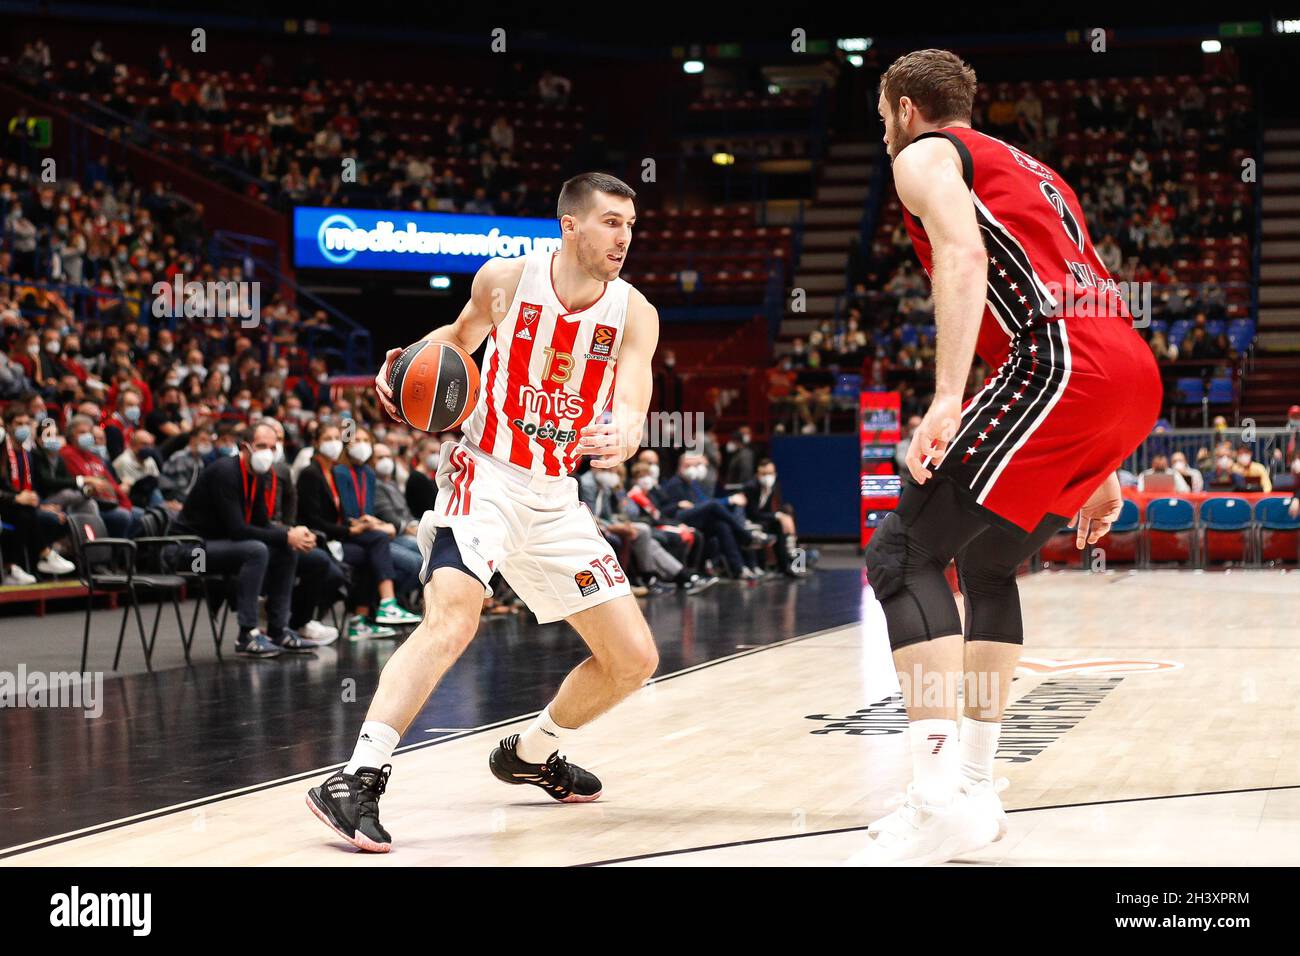 Milan, Italy. 28th Oct, 2021. Ognjen Dobric (Crvena Zvezda guard) dribbles  in front court in first quarter during basketball match Armani Milan vs Crvena  Zvezda Begrade on the round 7 of EuroLeague